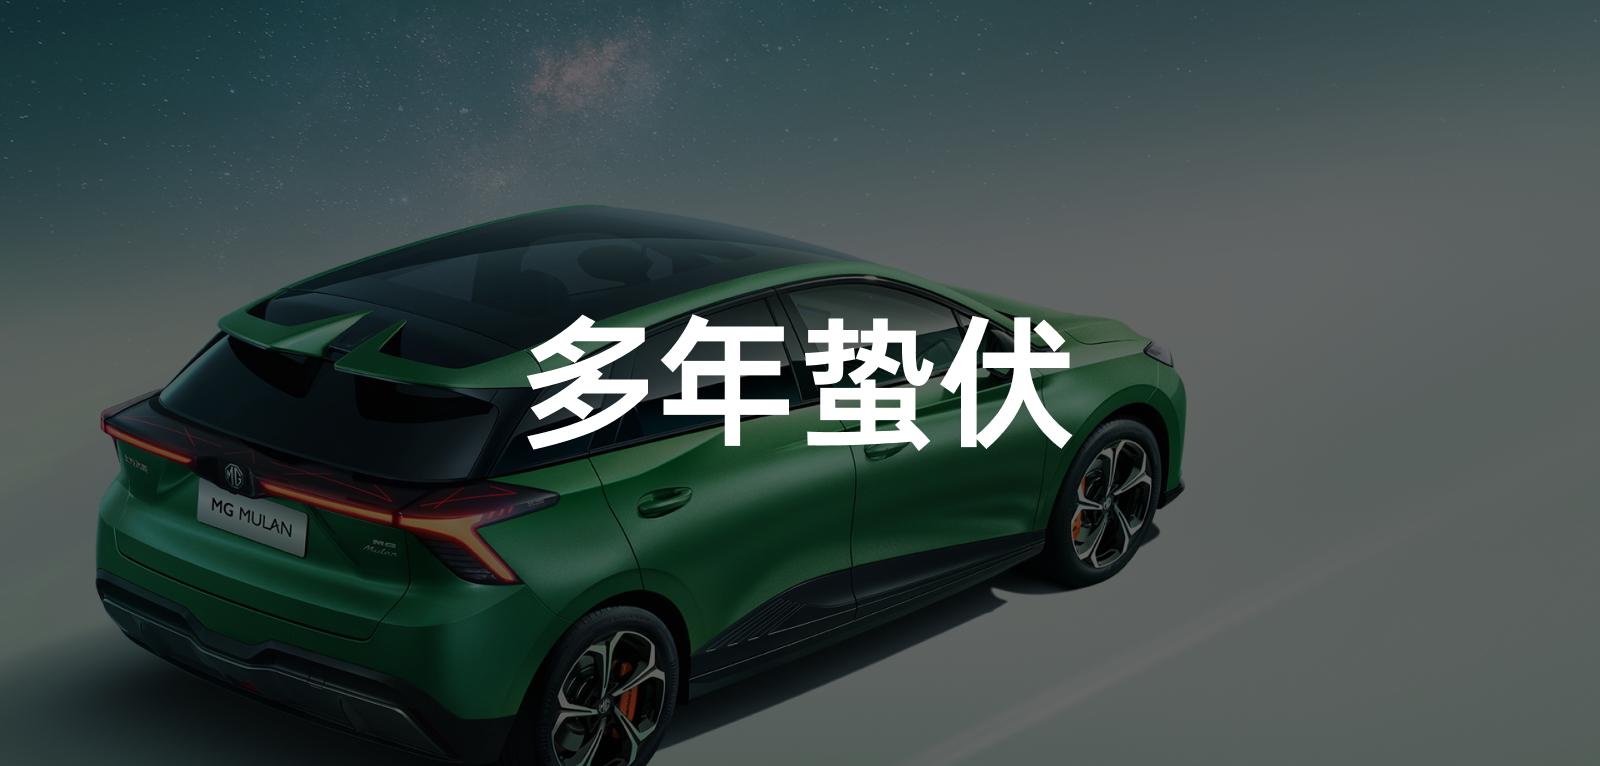 MG CEO Zhang Liang: MG MULAN is positioned to compete with Model 2.